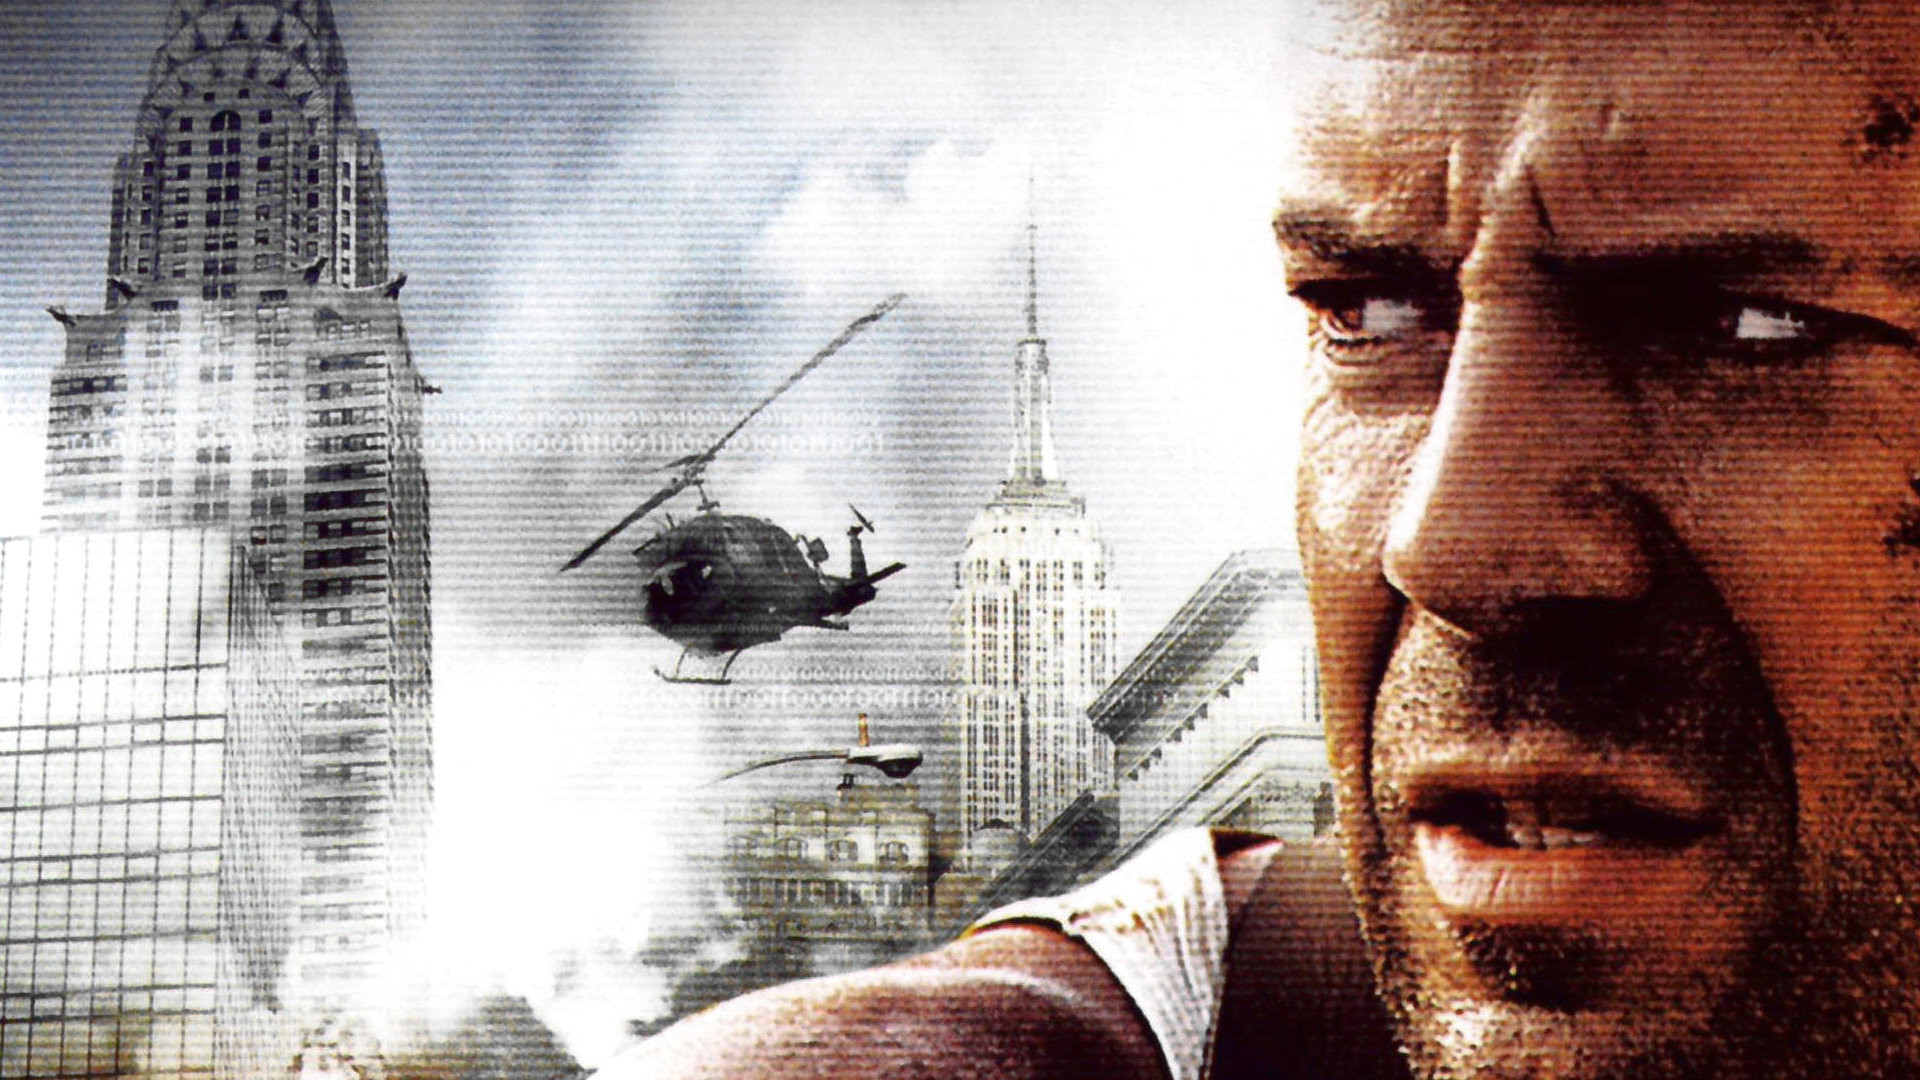 Live Or Die Hard Theme Song Movie Songs Tv Soundtracks